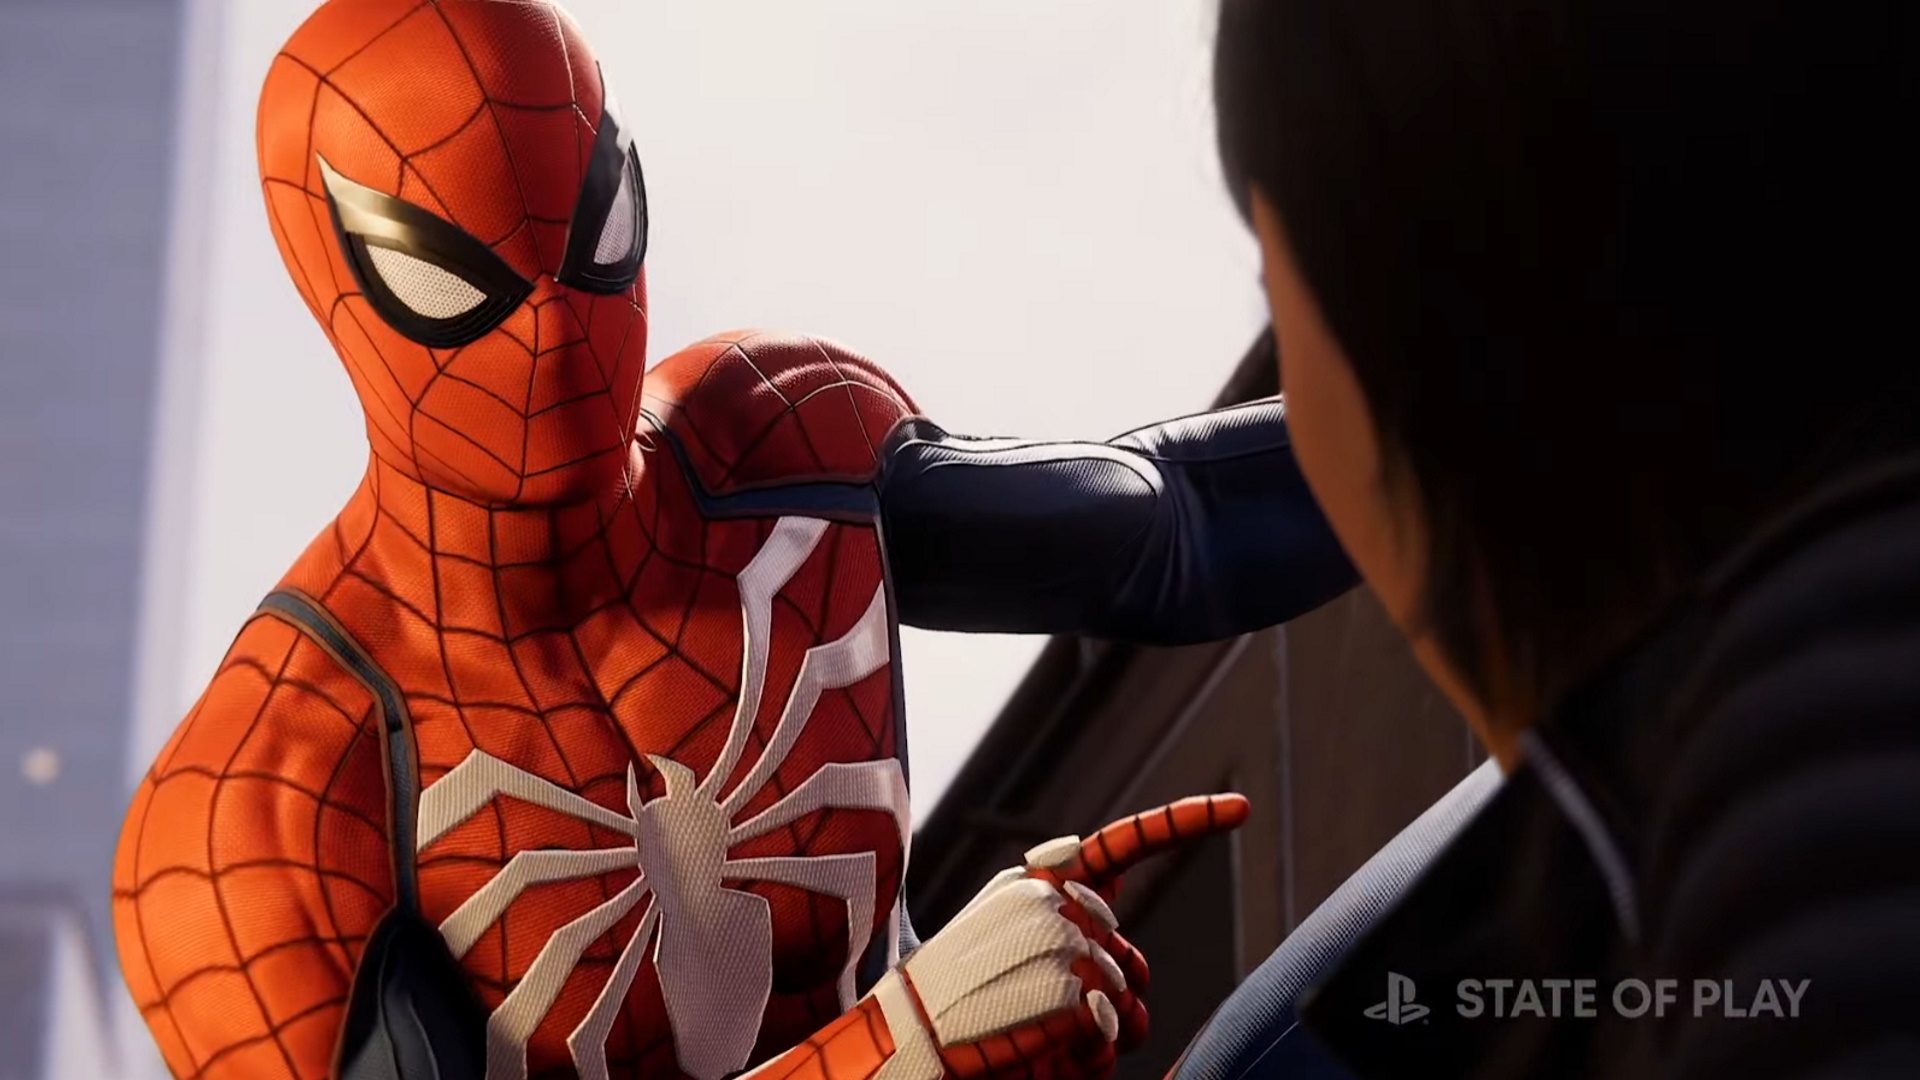 Insomniac's Spider-Man Remastered swings onto PC later this summer